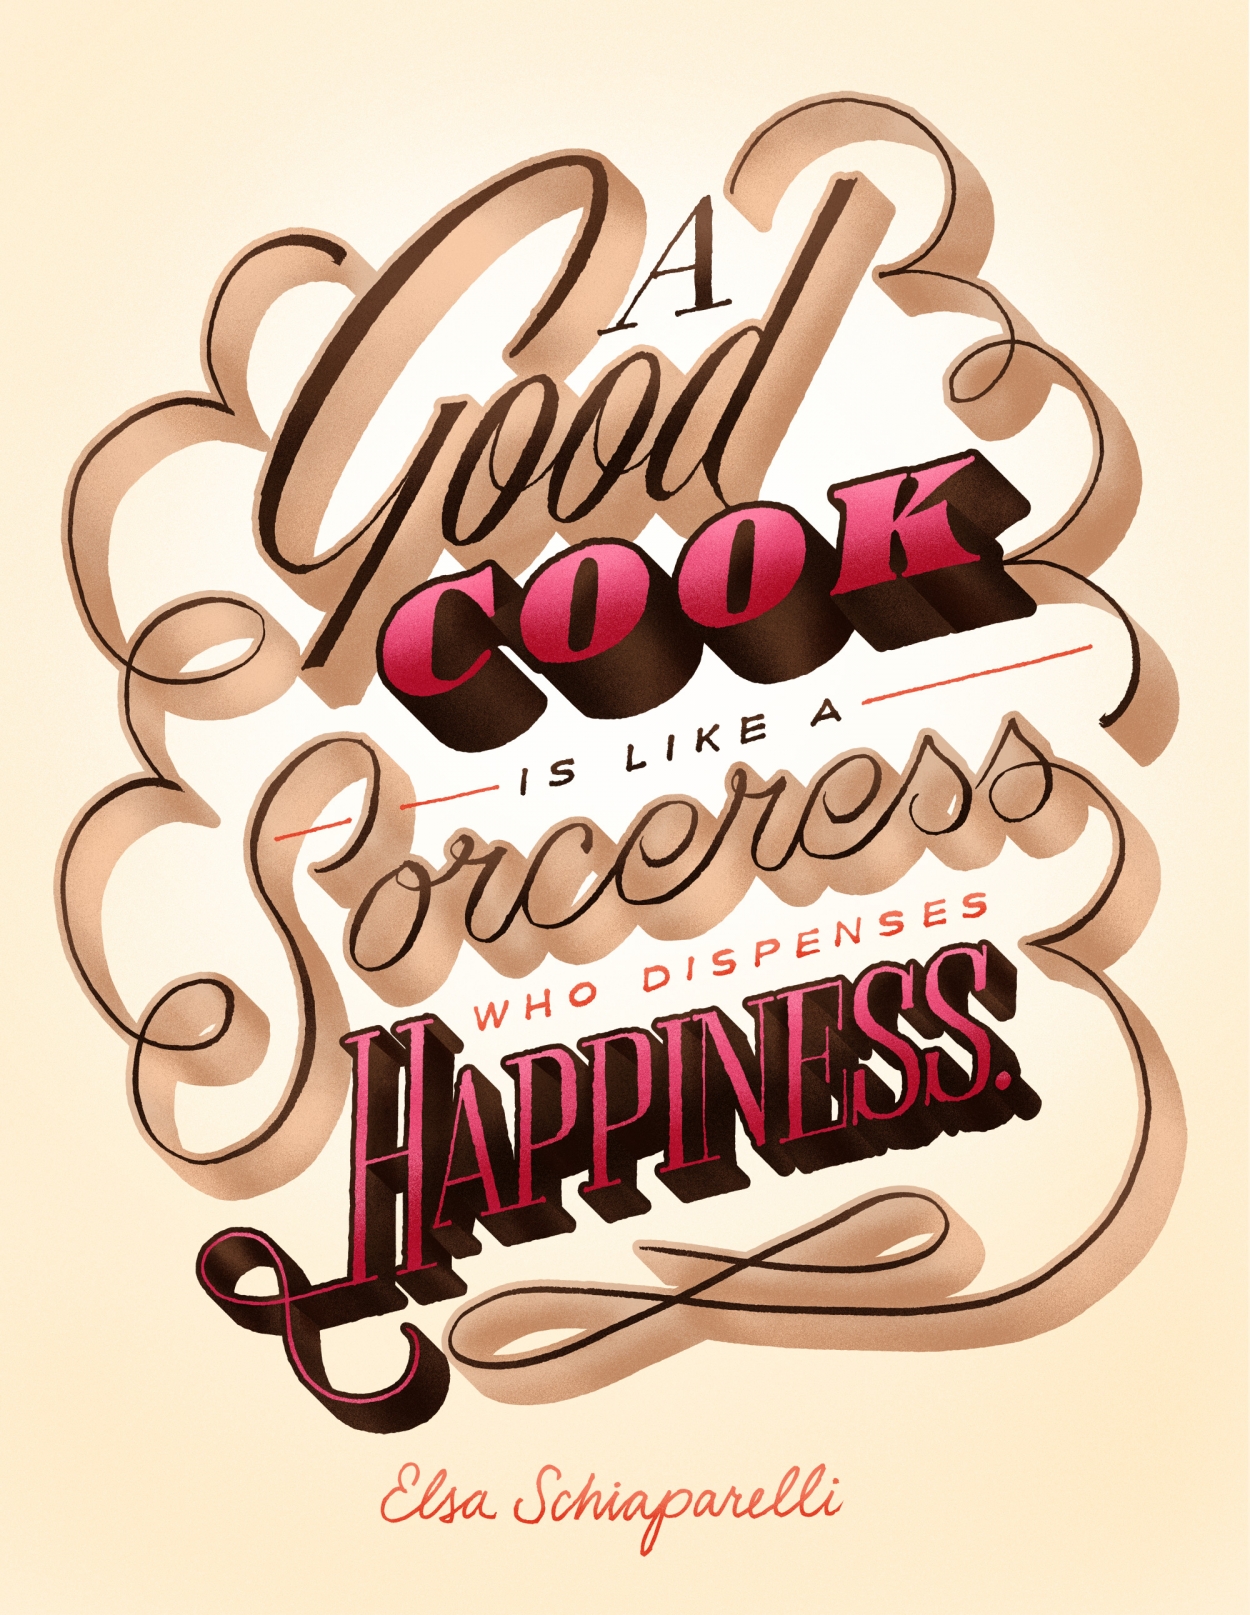 A Good Cook is like a Sorceress who dispenses Happiness - Woman's Day - Friends of Type